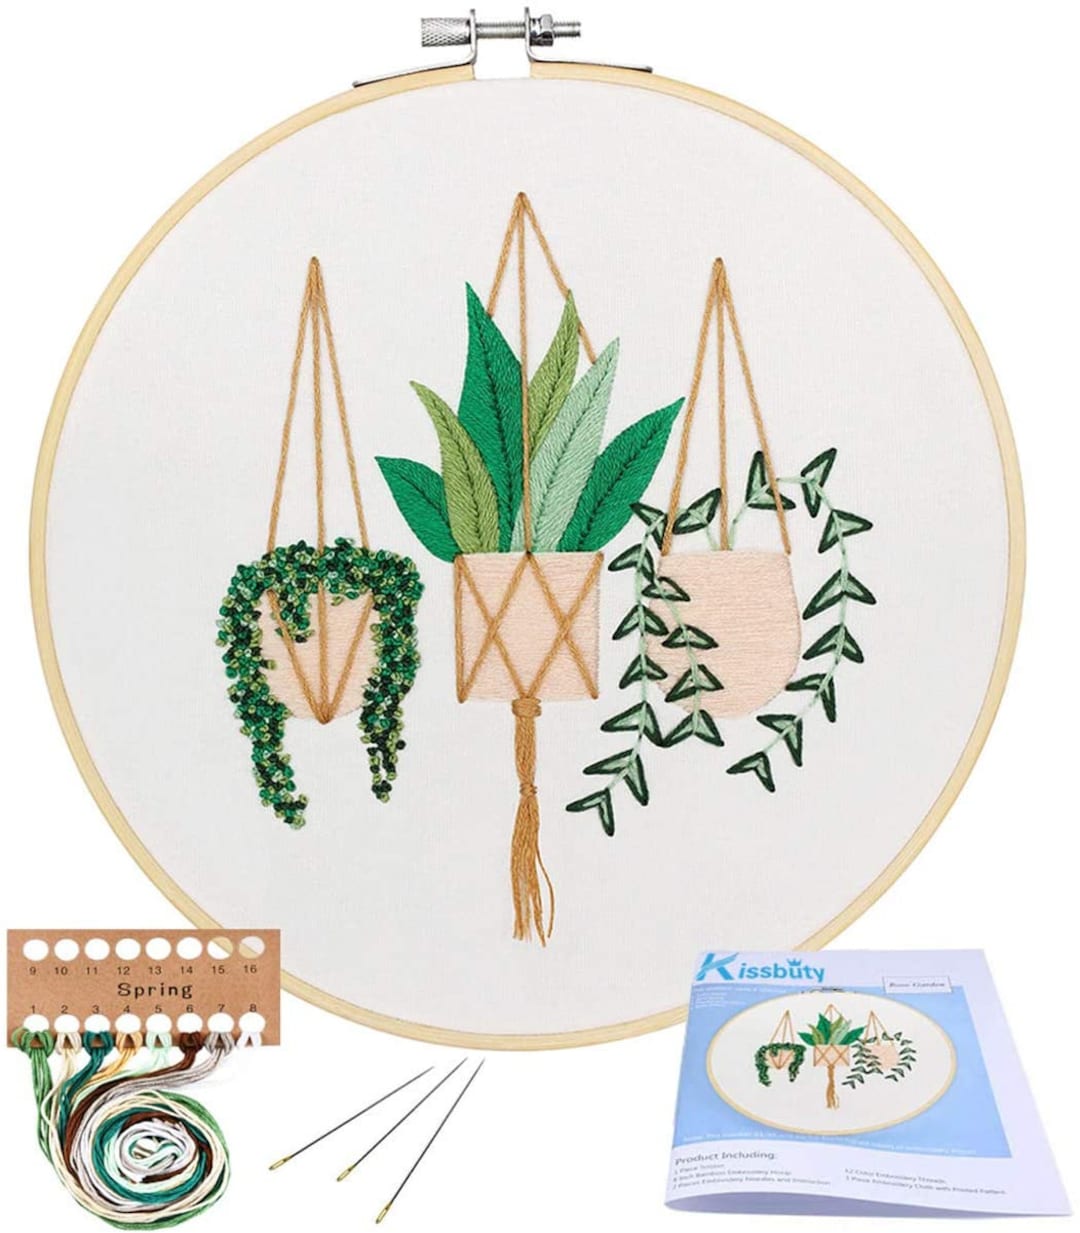 3 Pack Embroidery Starter Kit with Pattern, Kissbuty Full Range of Stamped Embroidery  Kit Including Embroidery Fabric with Pattern, Bamboo Embroidery Hoops,  Color Threads and Tools Kit (Floral Plants)